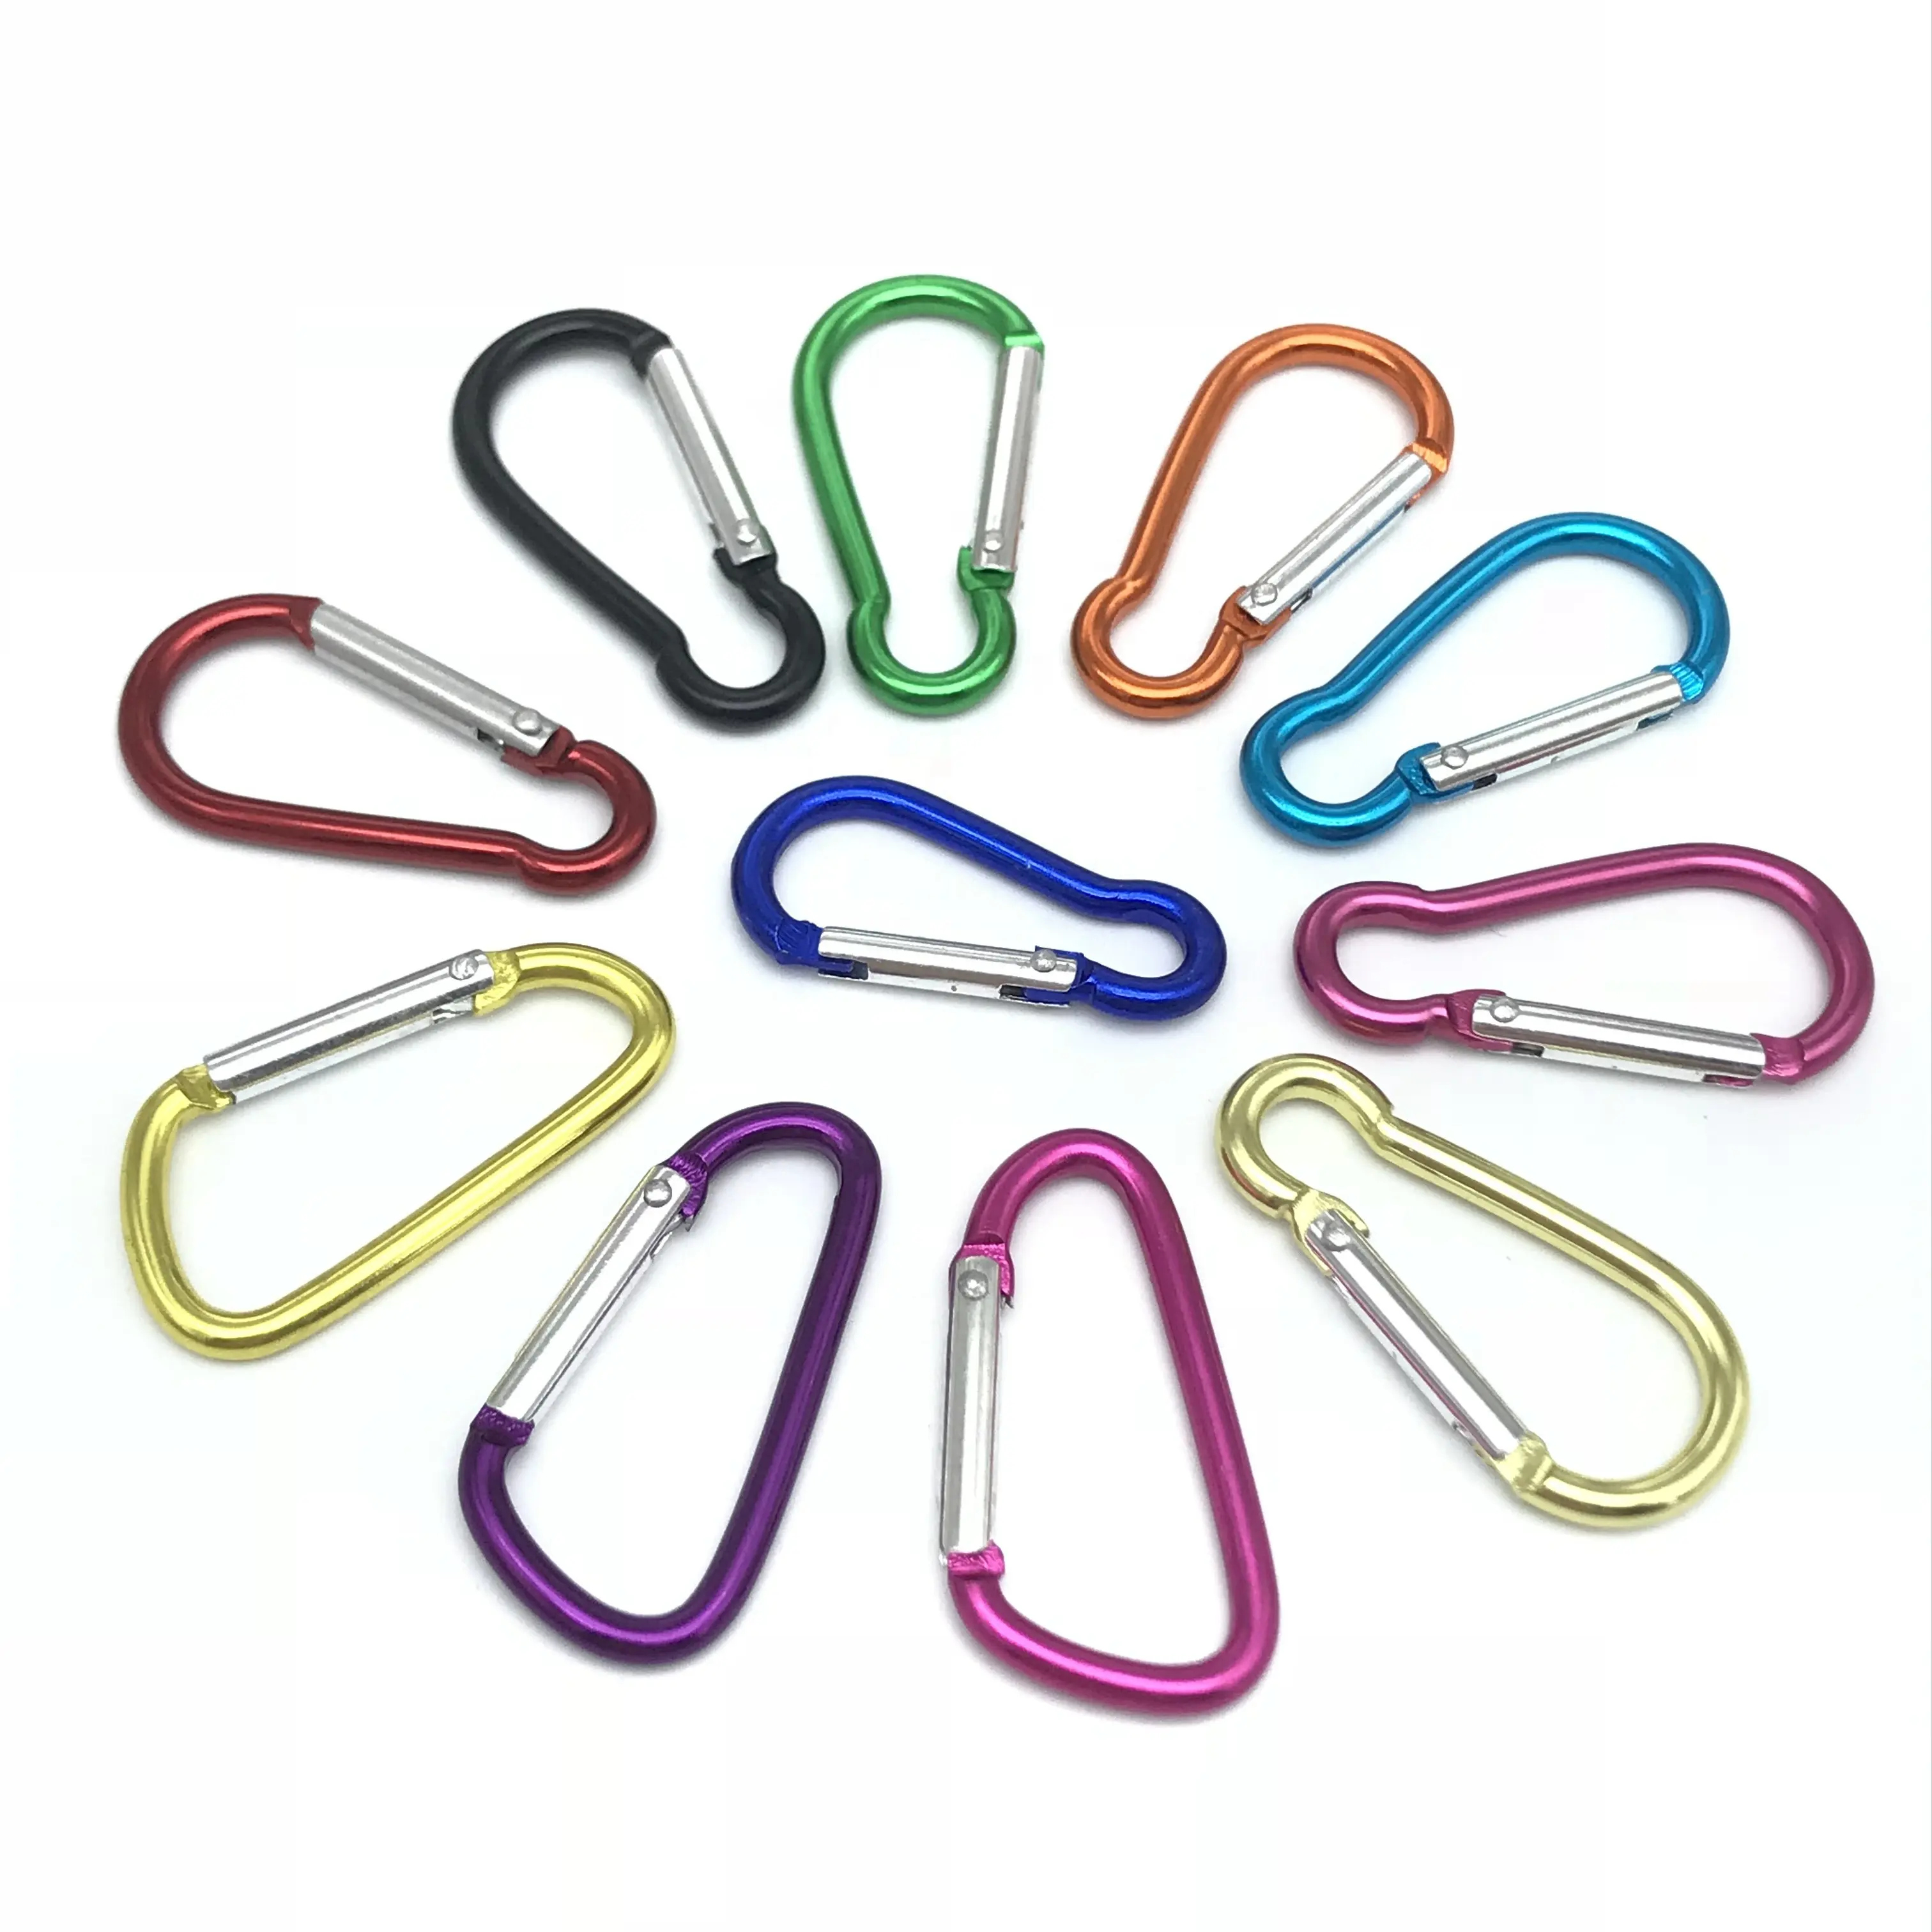 4cm to 8cm Gourd Shaped D Shaped Keychain Outdoor Hook Aluminum Carabiner